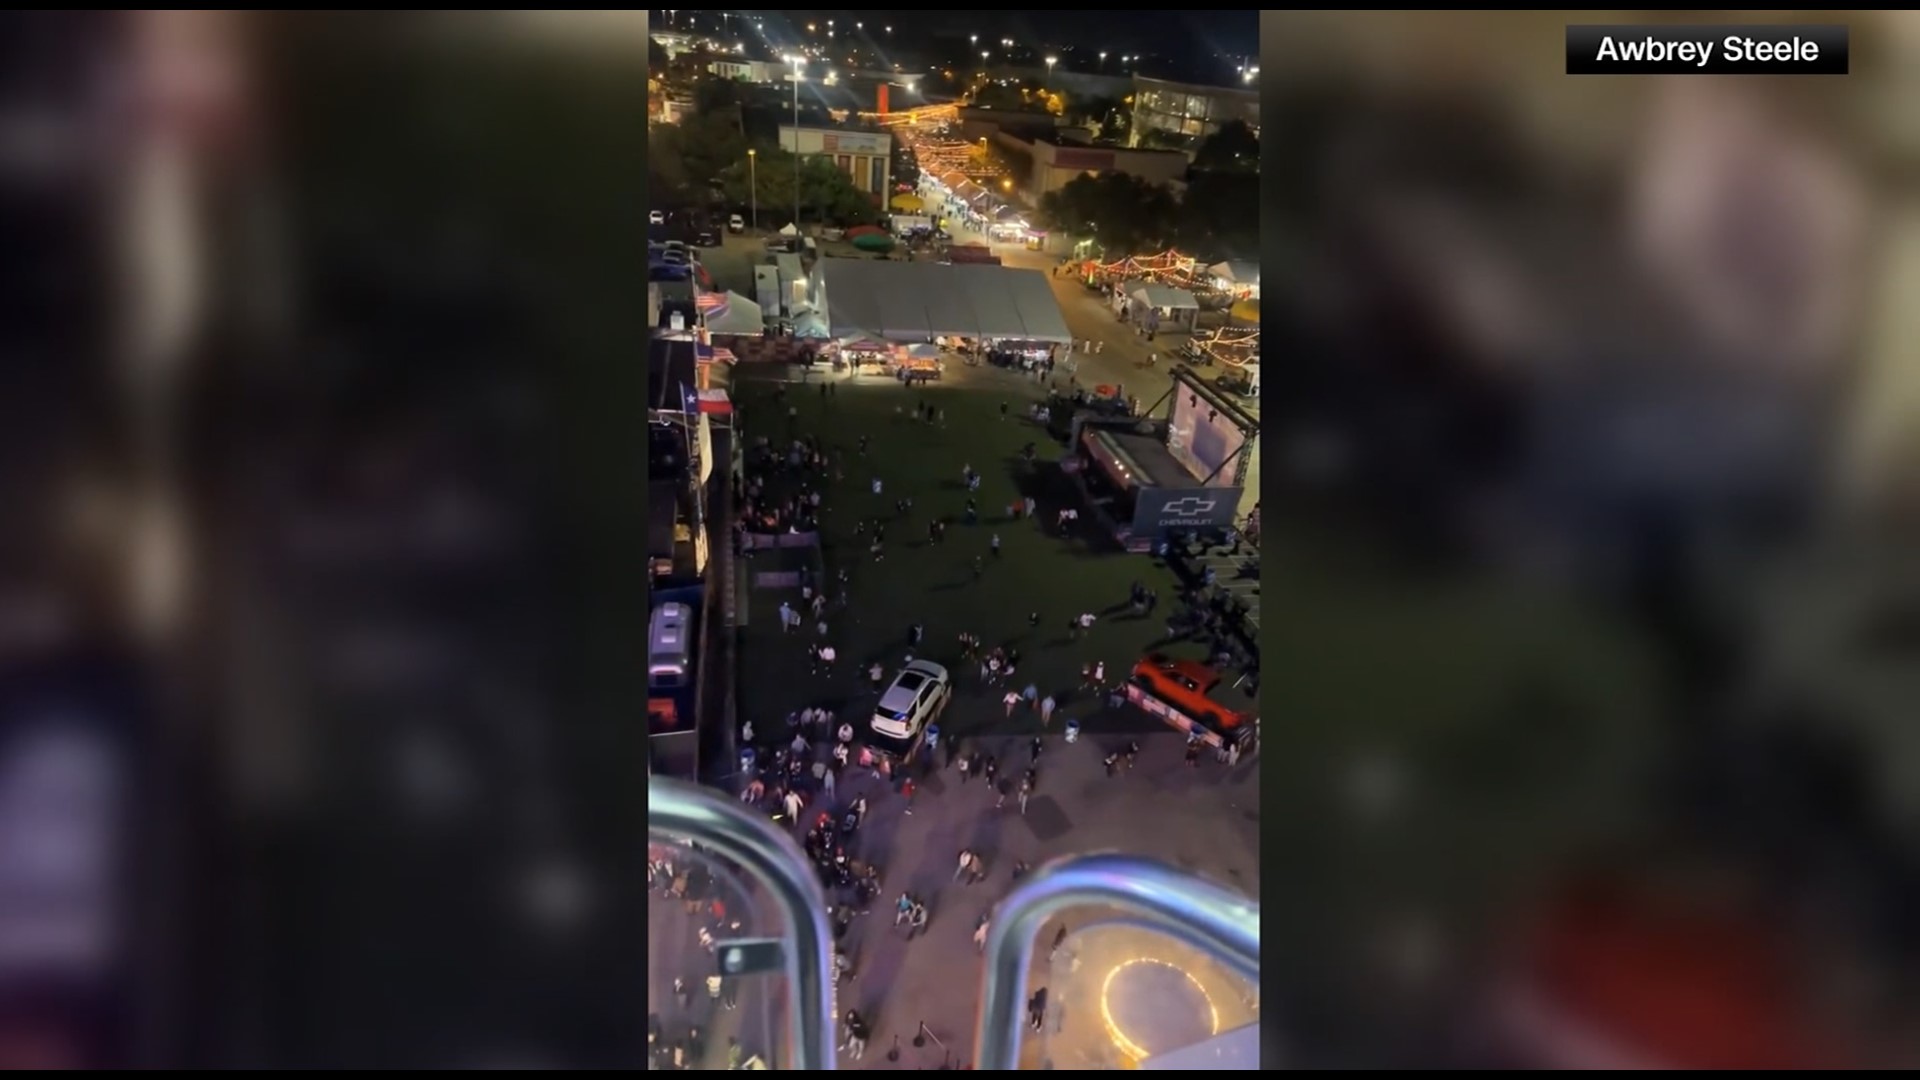 Three people were injured in a shooting at the State Fair of Texas on Saturday night, Dallas Police said. The fair usually opens at 10 a.m. on Sundays.